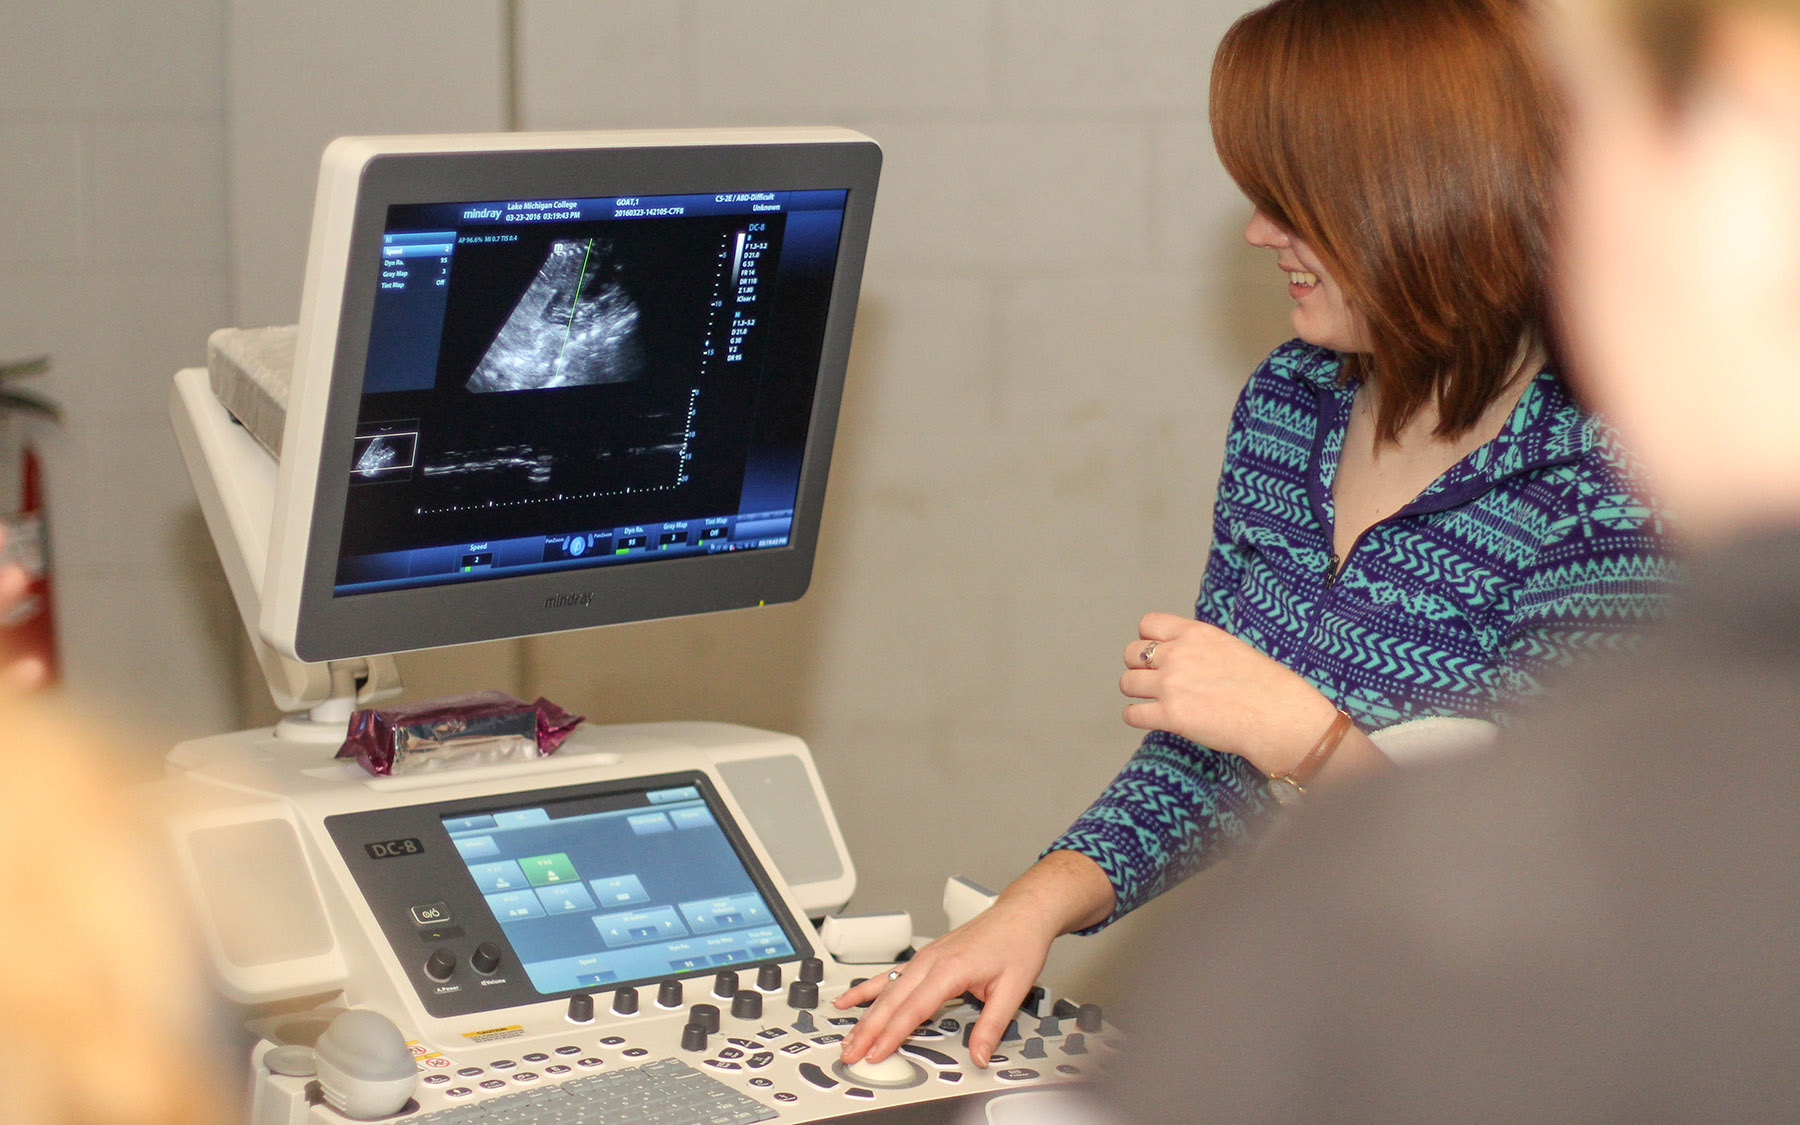 Sonography student looking at an image